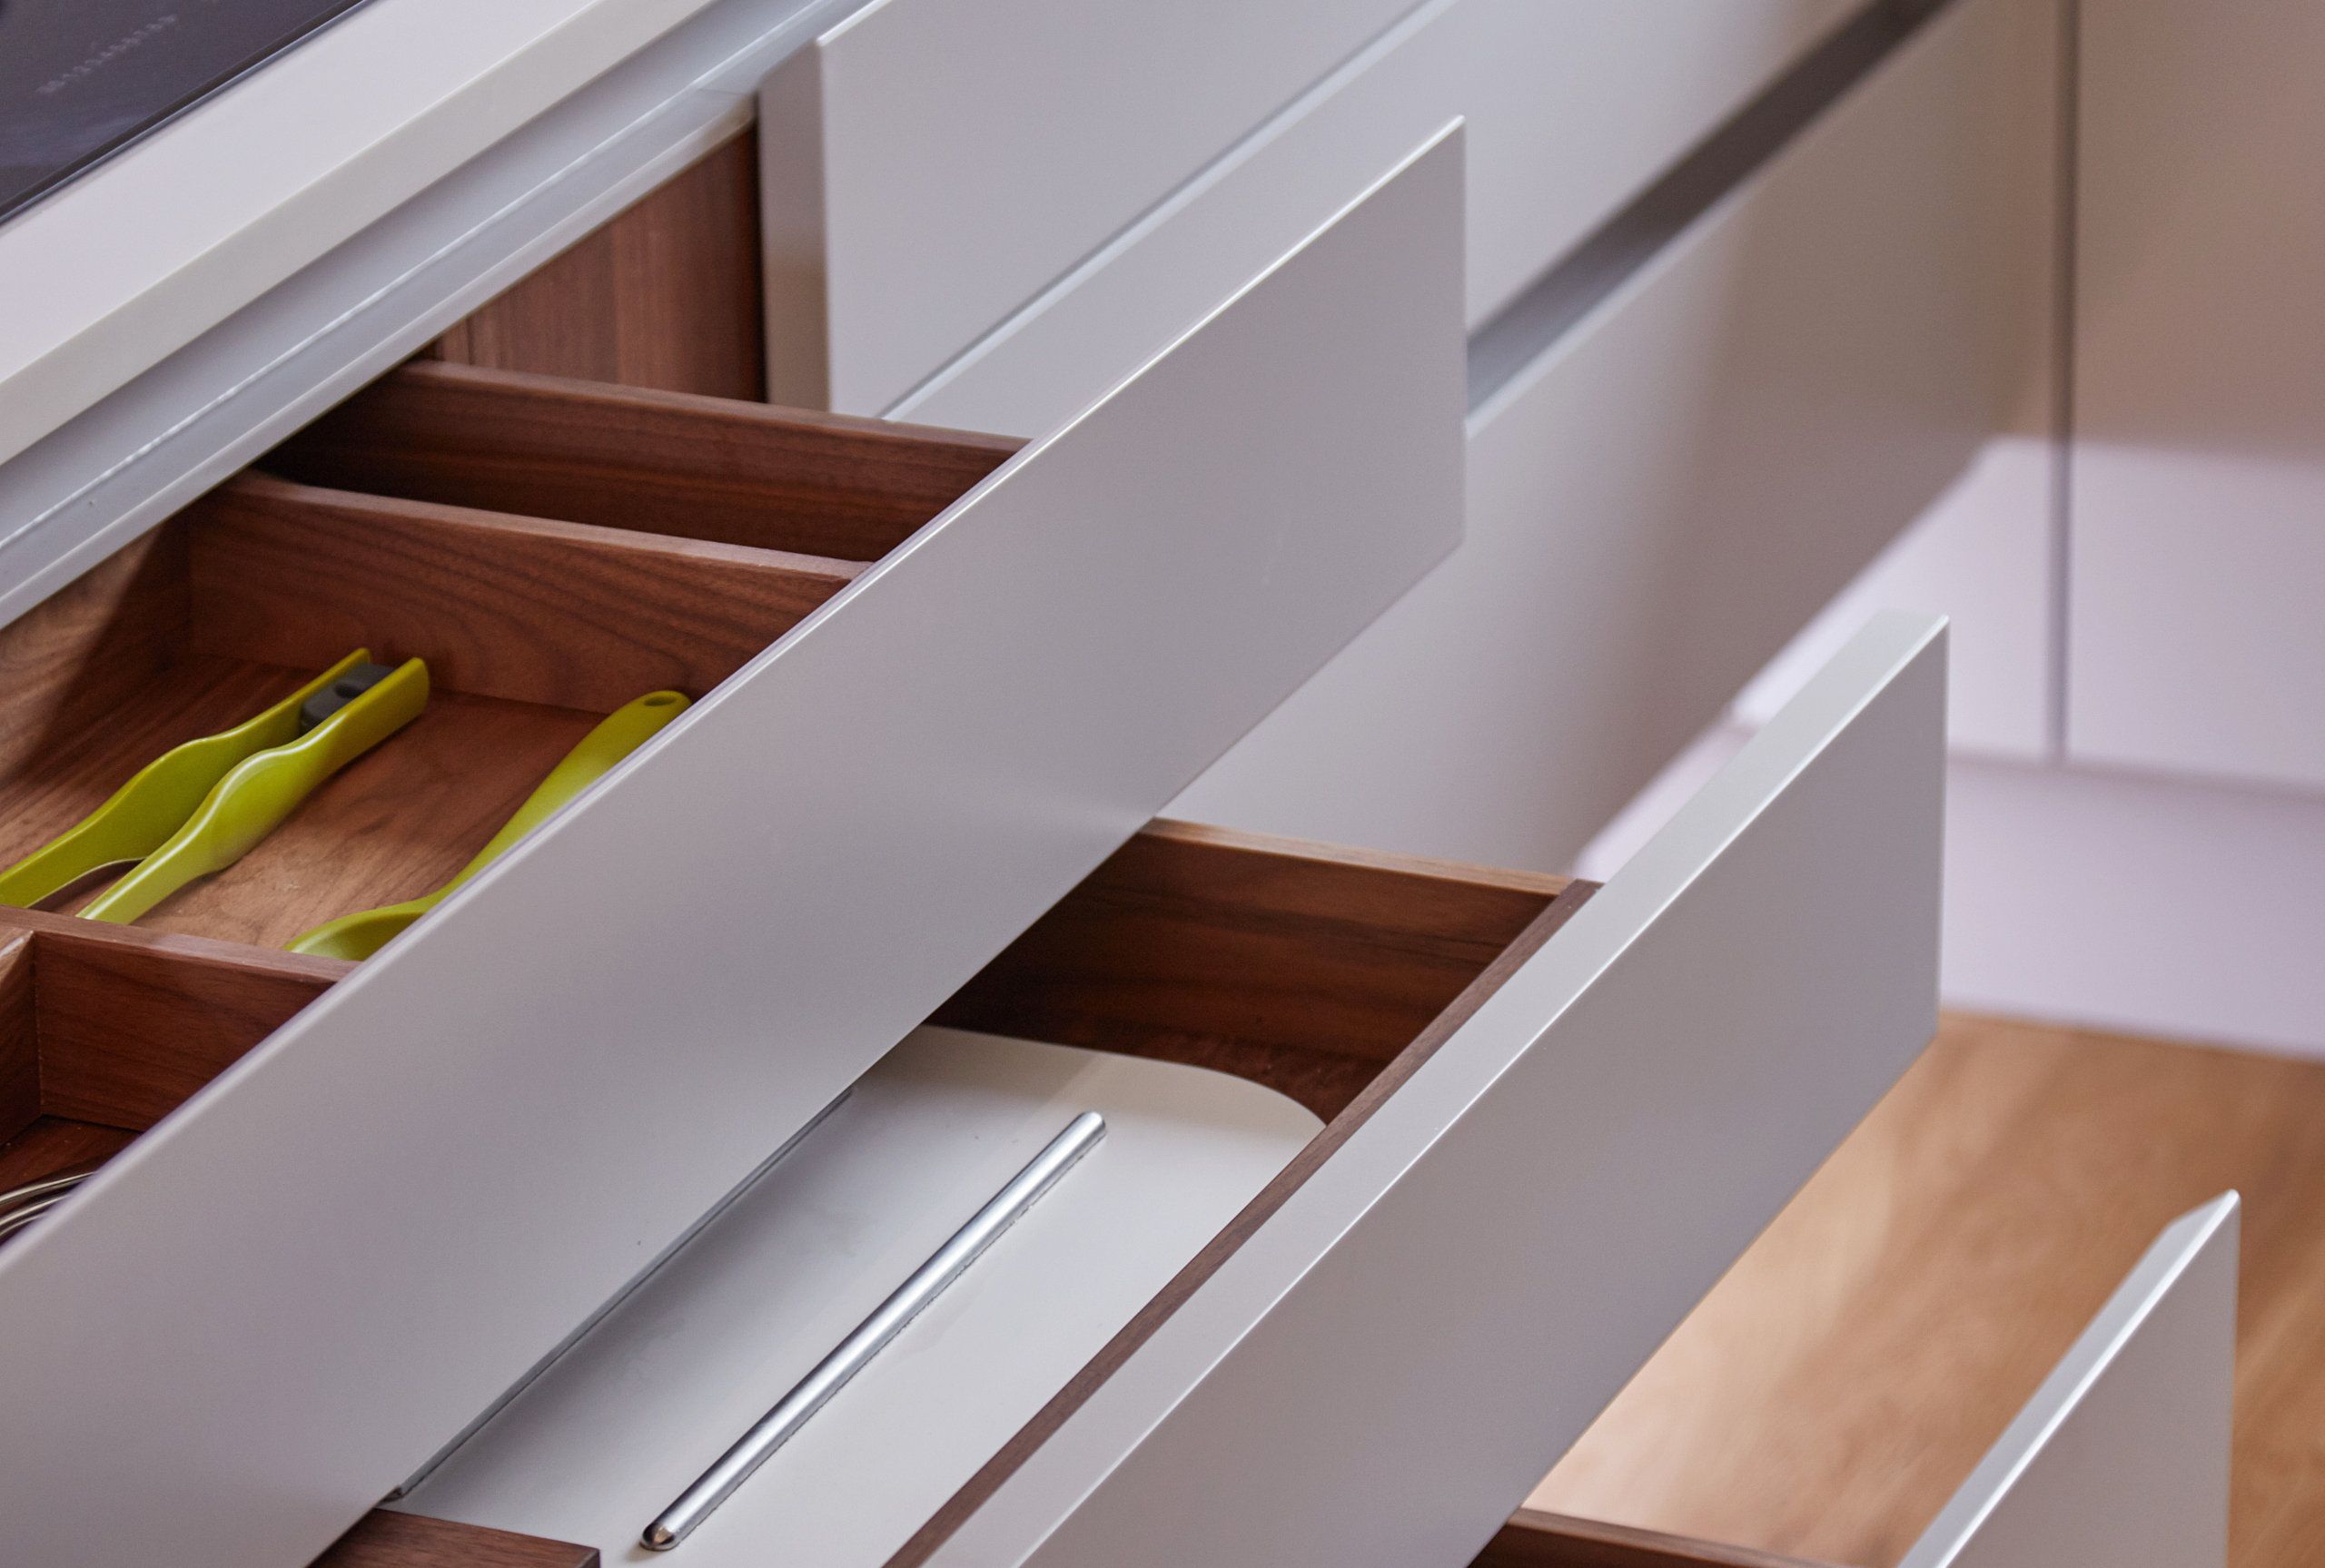 A series of drawers are opened in step, showing the precision finish of the bespoke kitchen from Stonehouse Furniture.